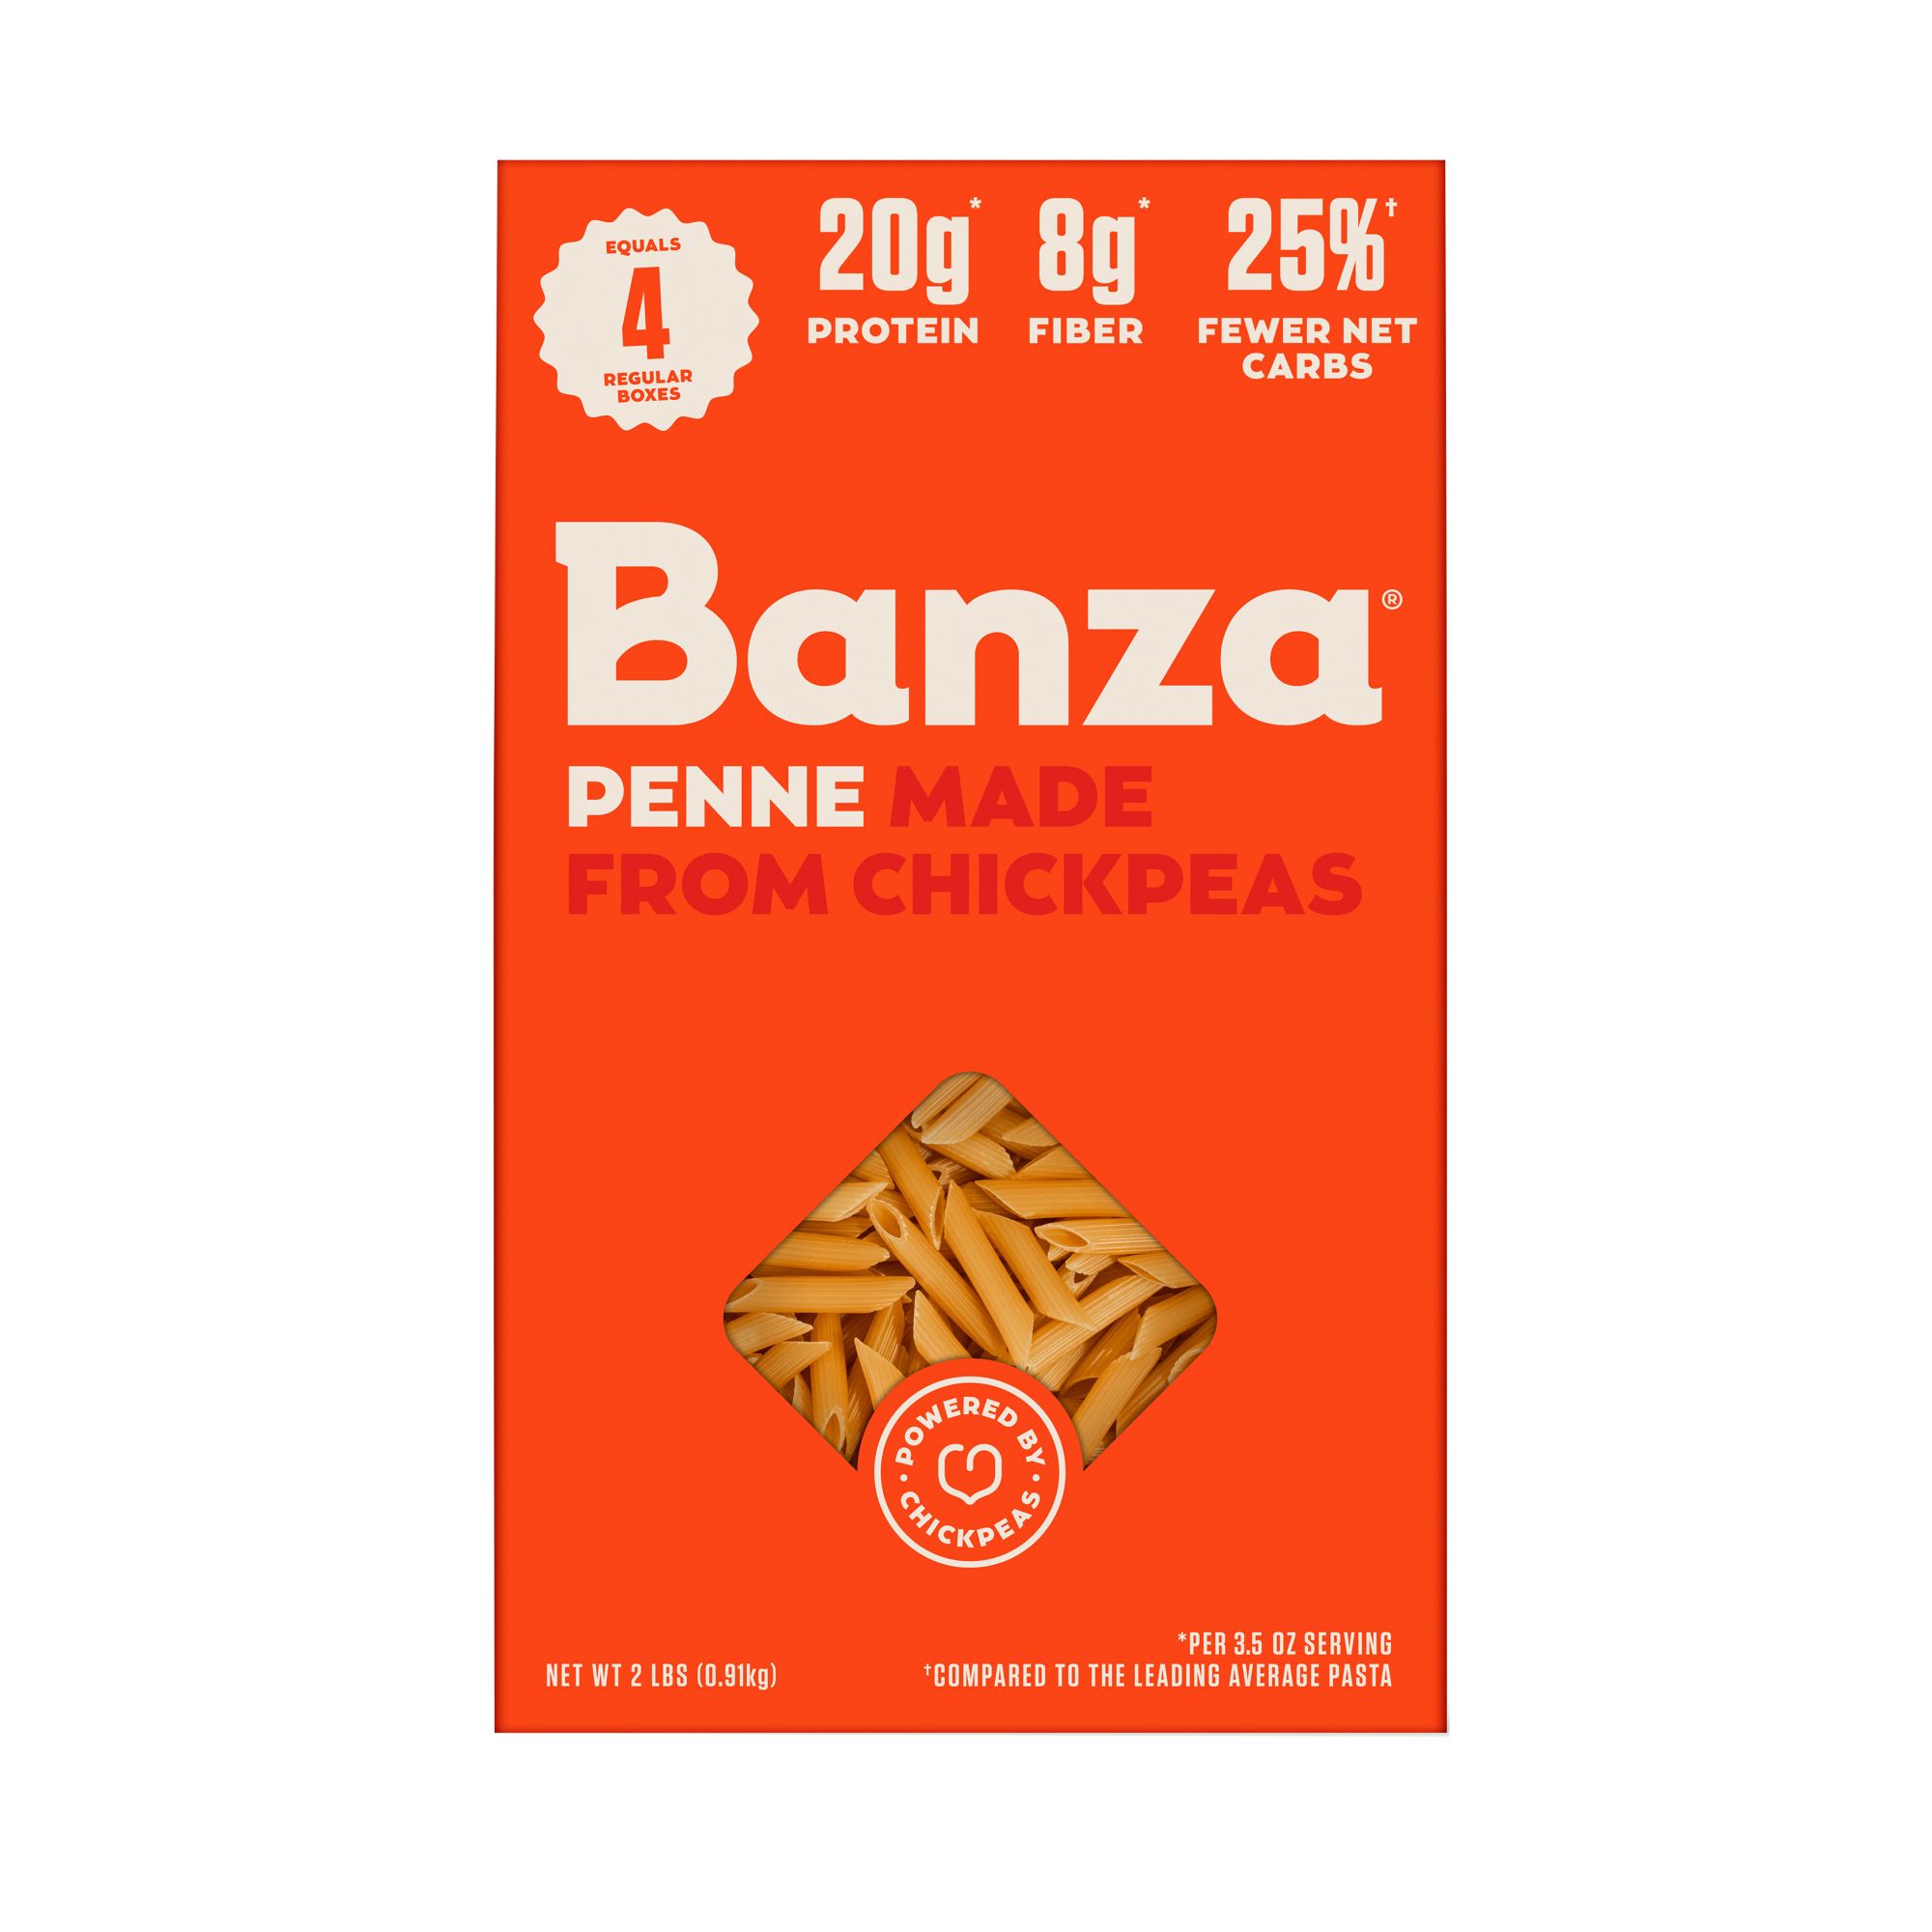 Banza Penne Pasta Four-Pack, Gluten Free, High Protein, and Lower Carb Chickpea Pasta, 2 lbs.